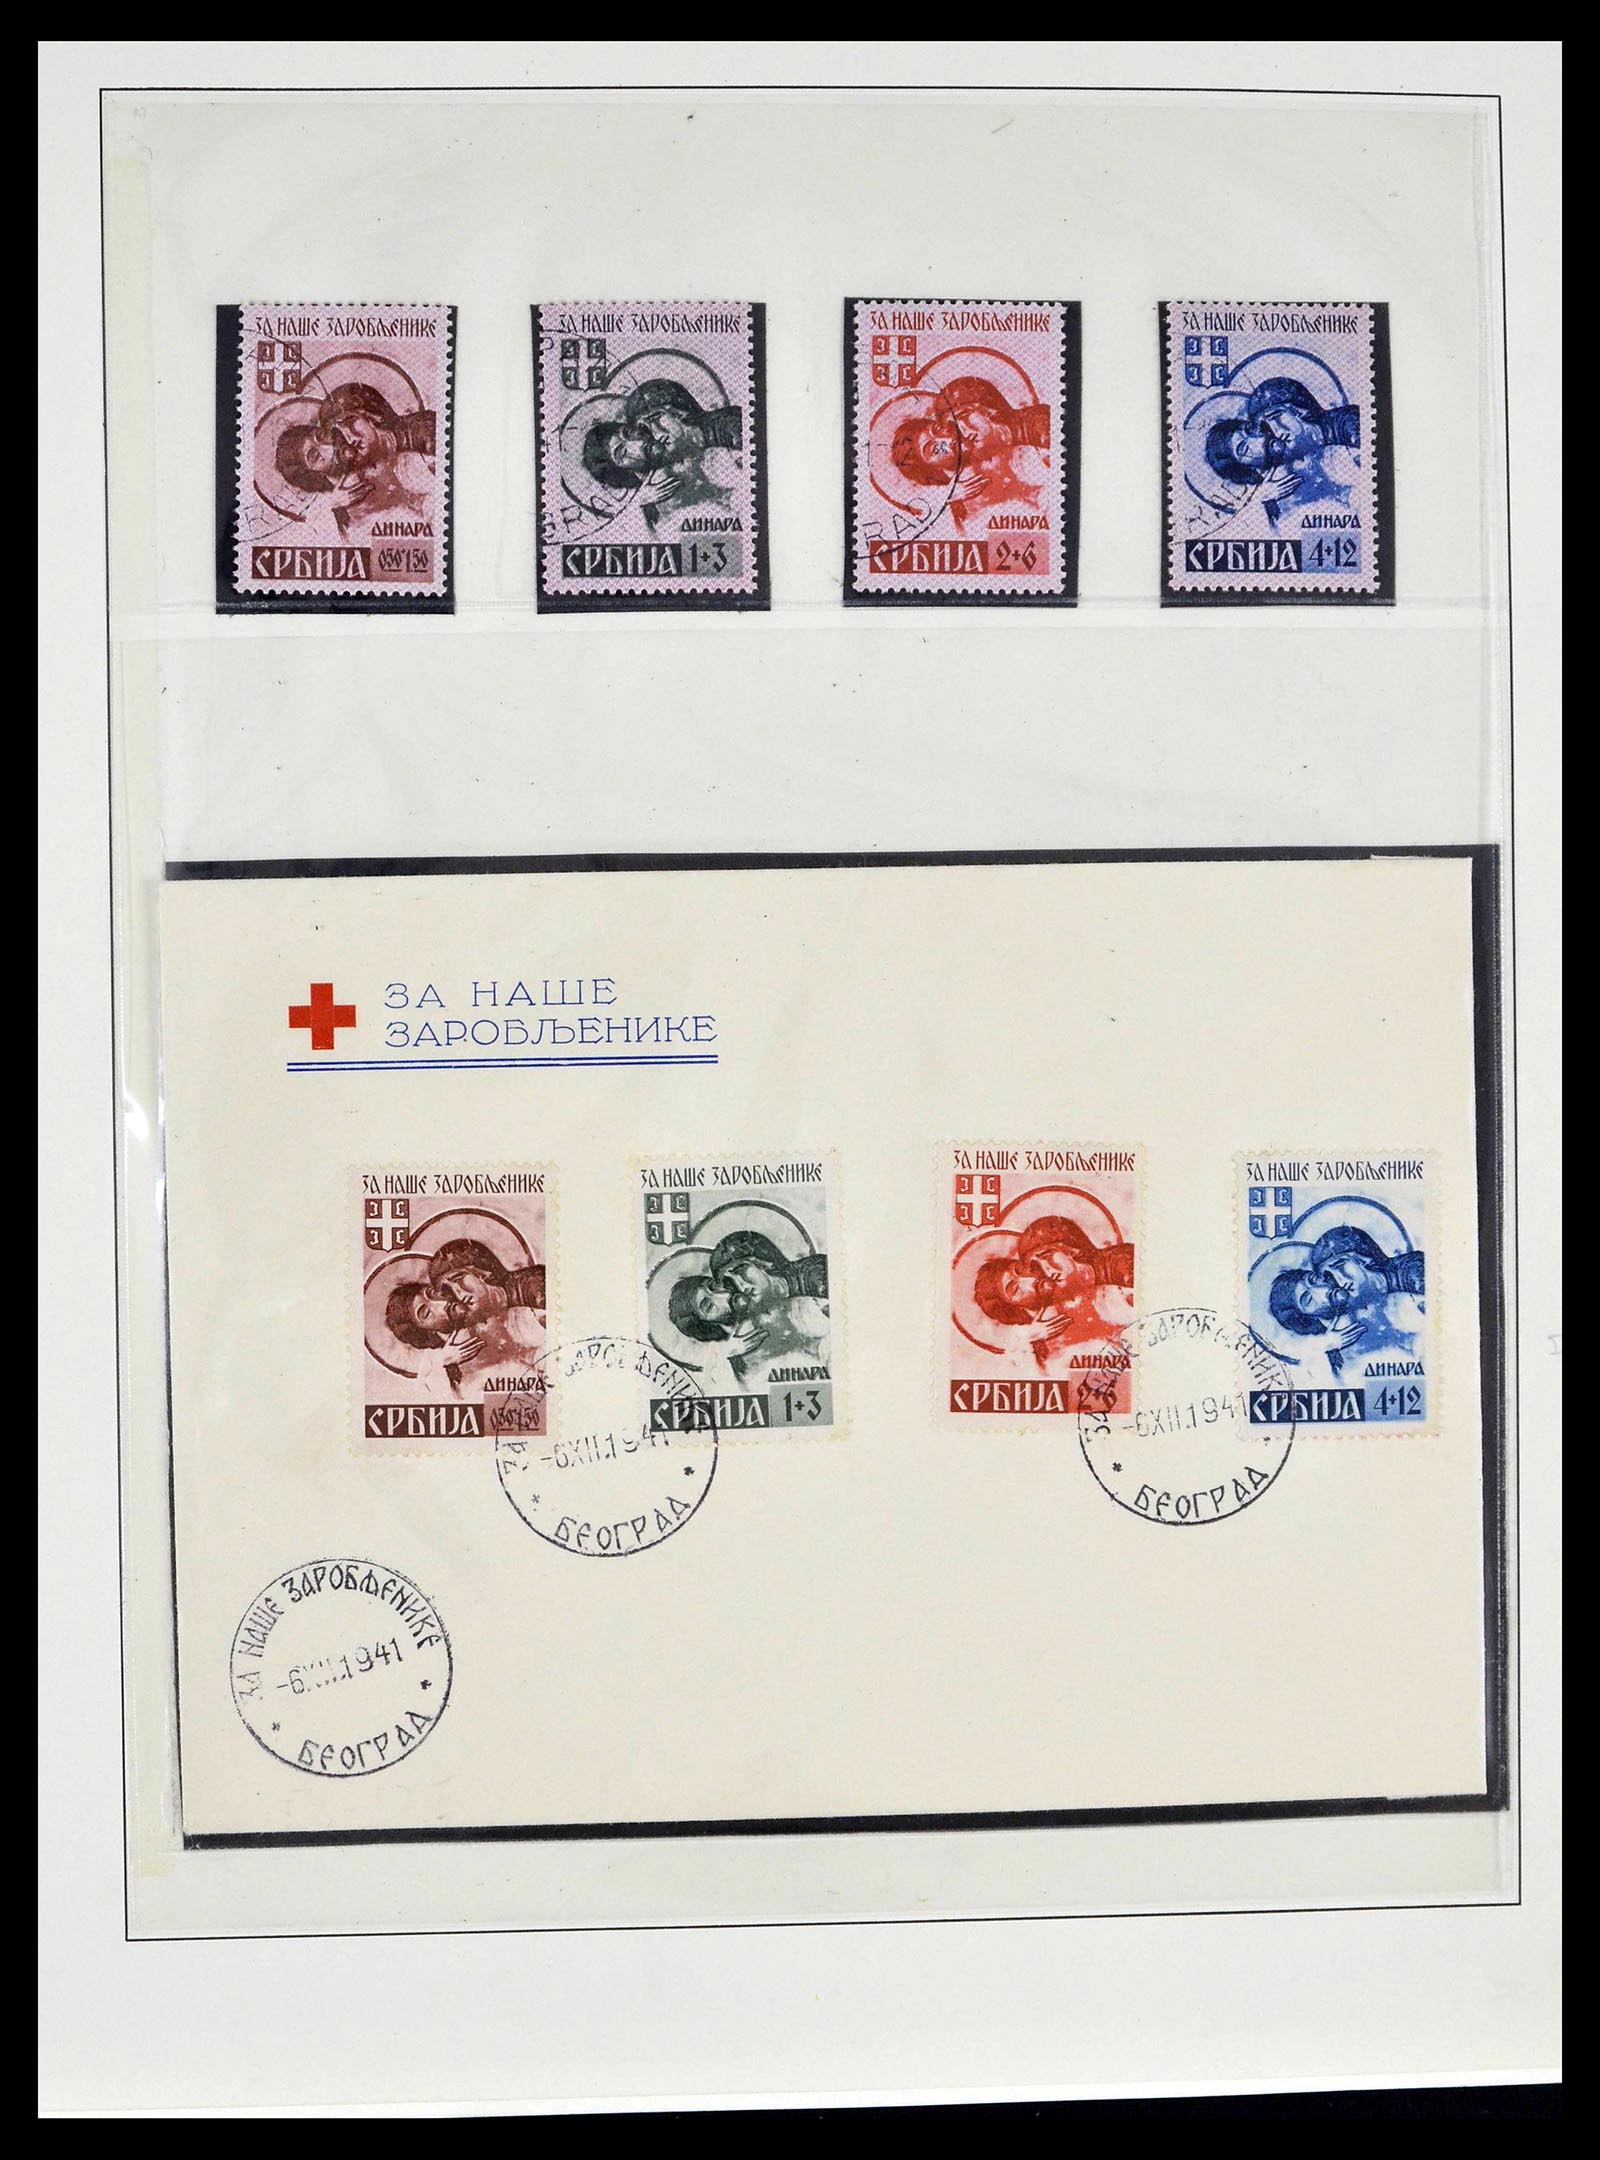 39396 0016 - Stamp collection 39396 German occupation WW II 1939-1945.